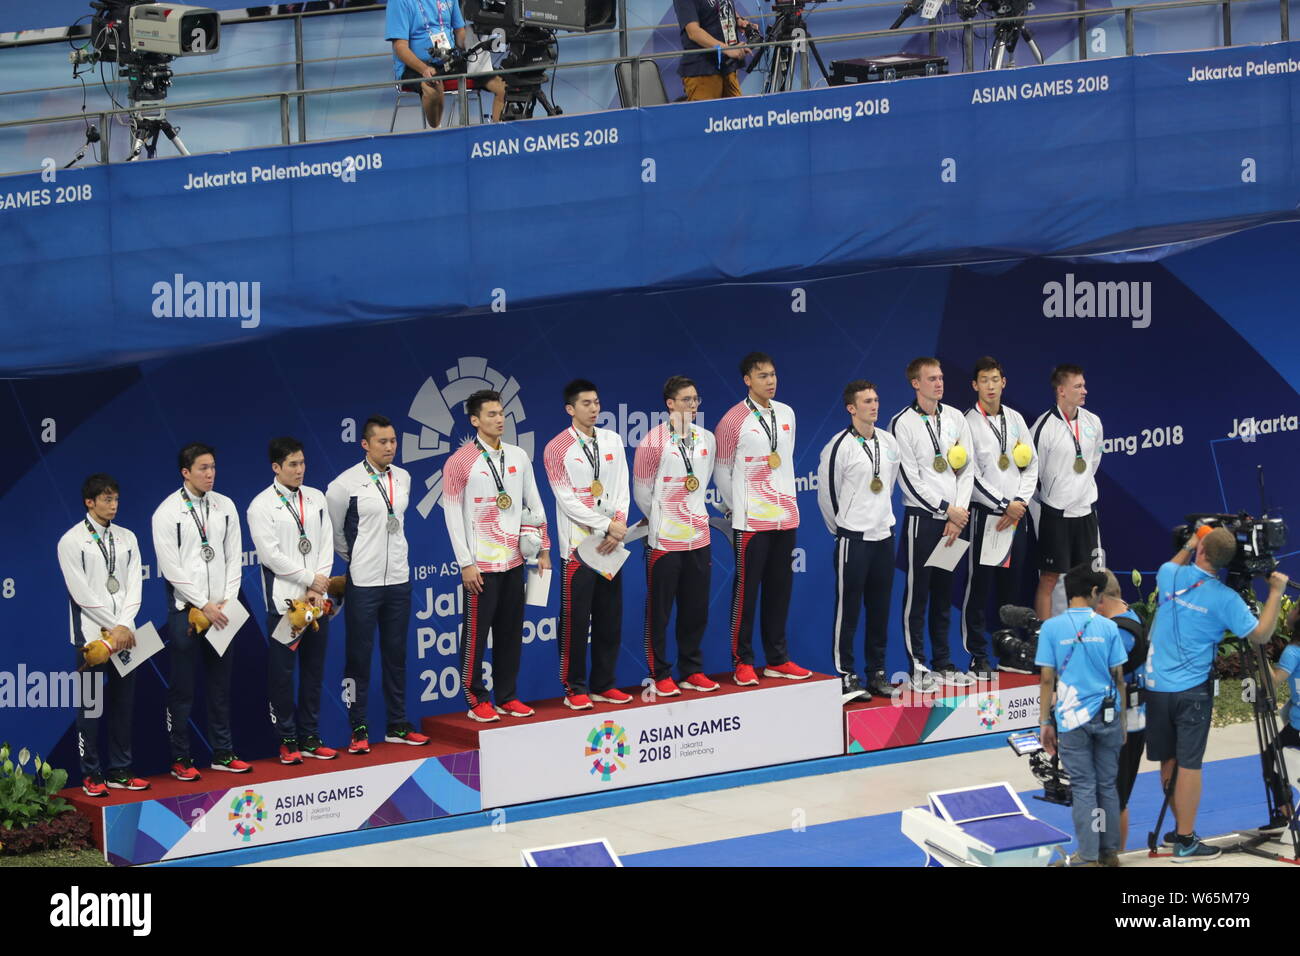 Swimmers of (From left) Japan, China, Kazakhstan stand on the podium at the award ceremony after the men's 4x100 medley relay swimming final during th Stock Photo